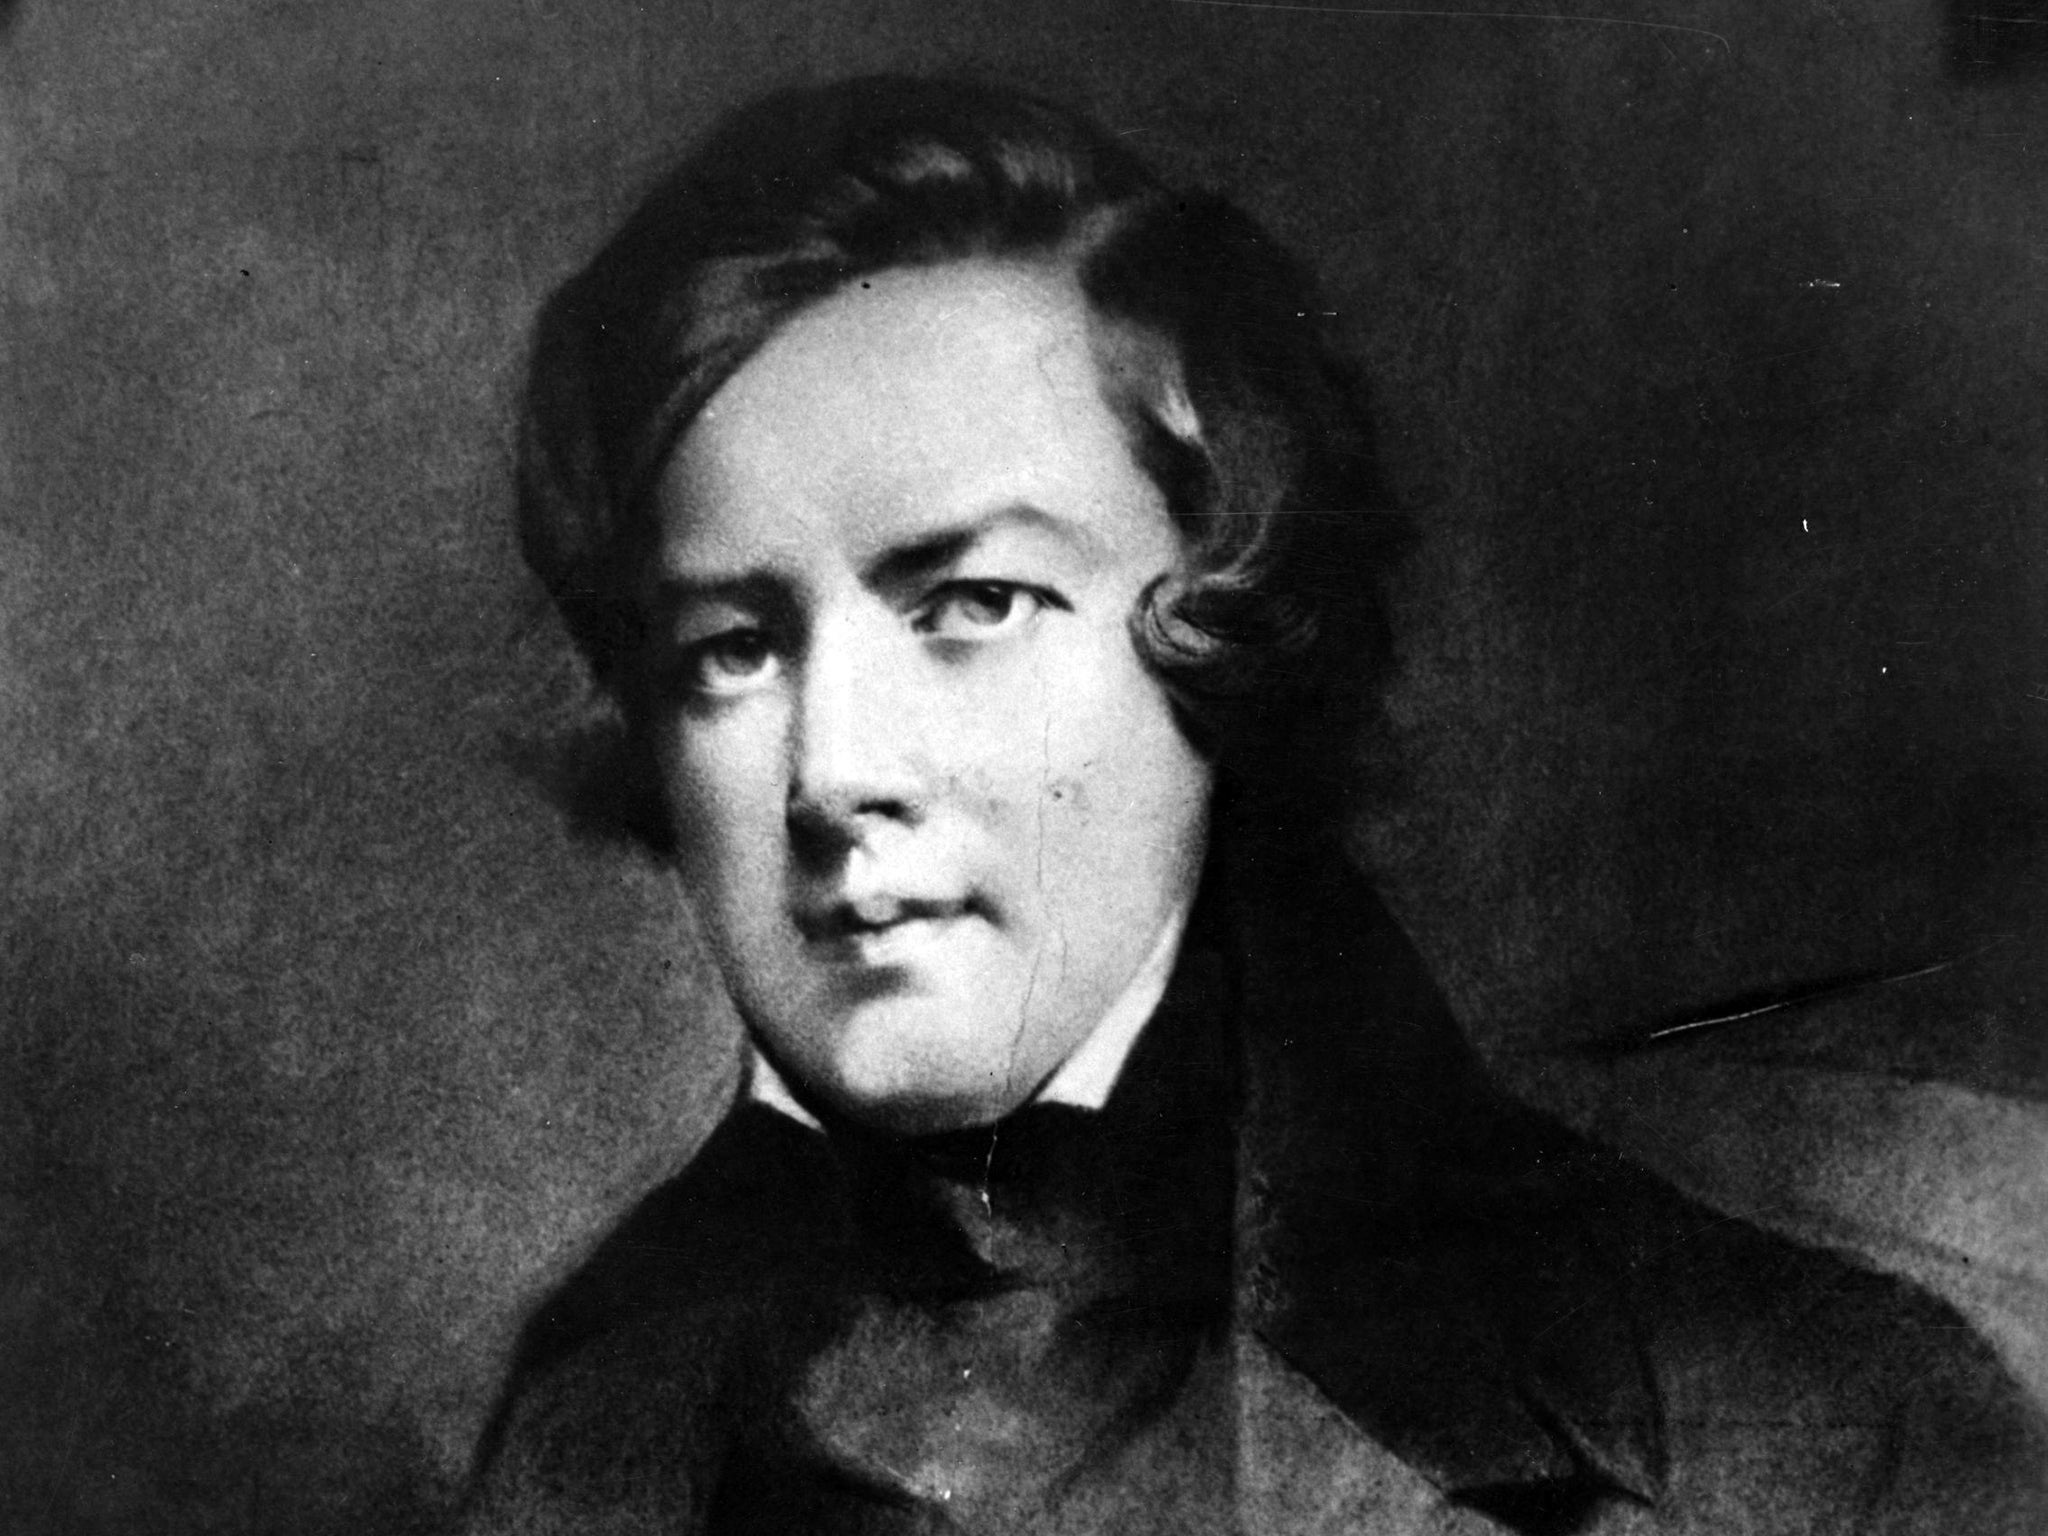 Schumann's Violin Concerto, his last orchestral work, has had a chequered existence